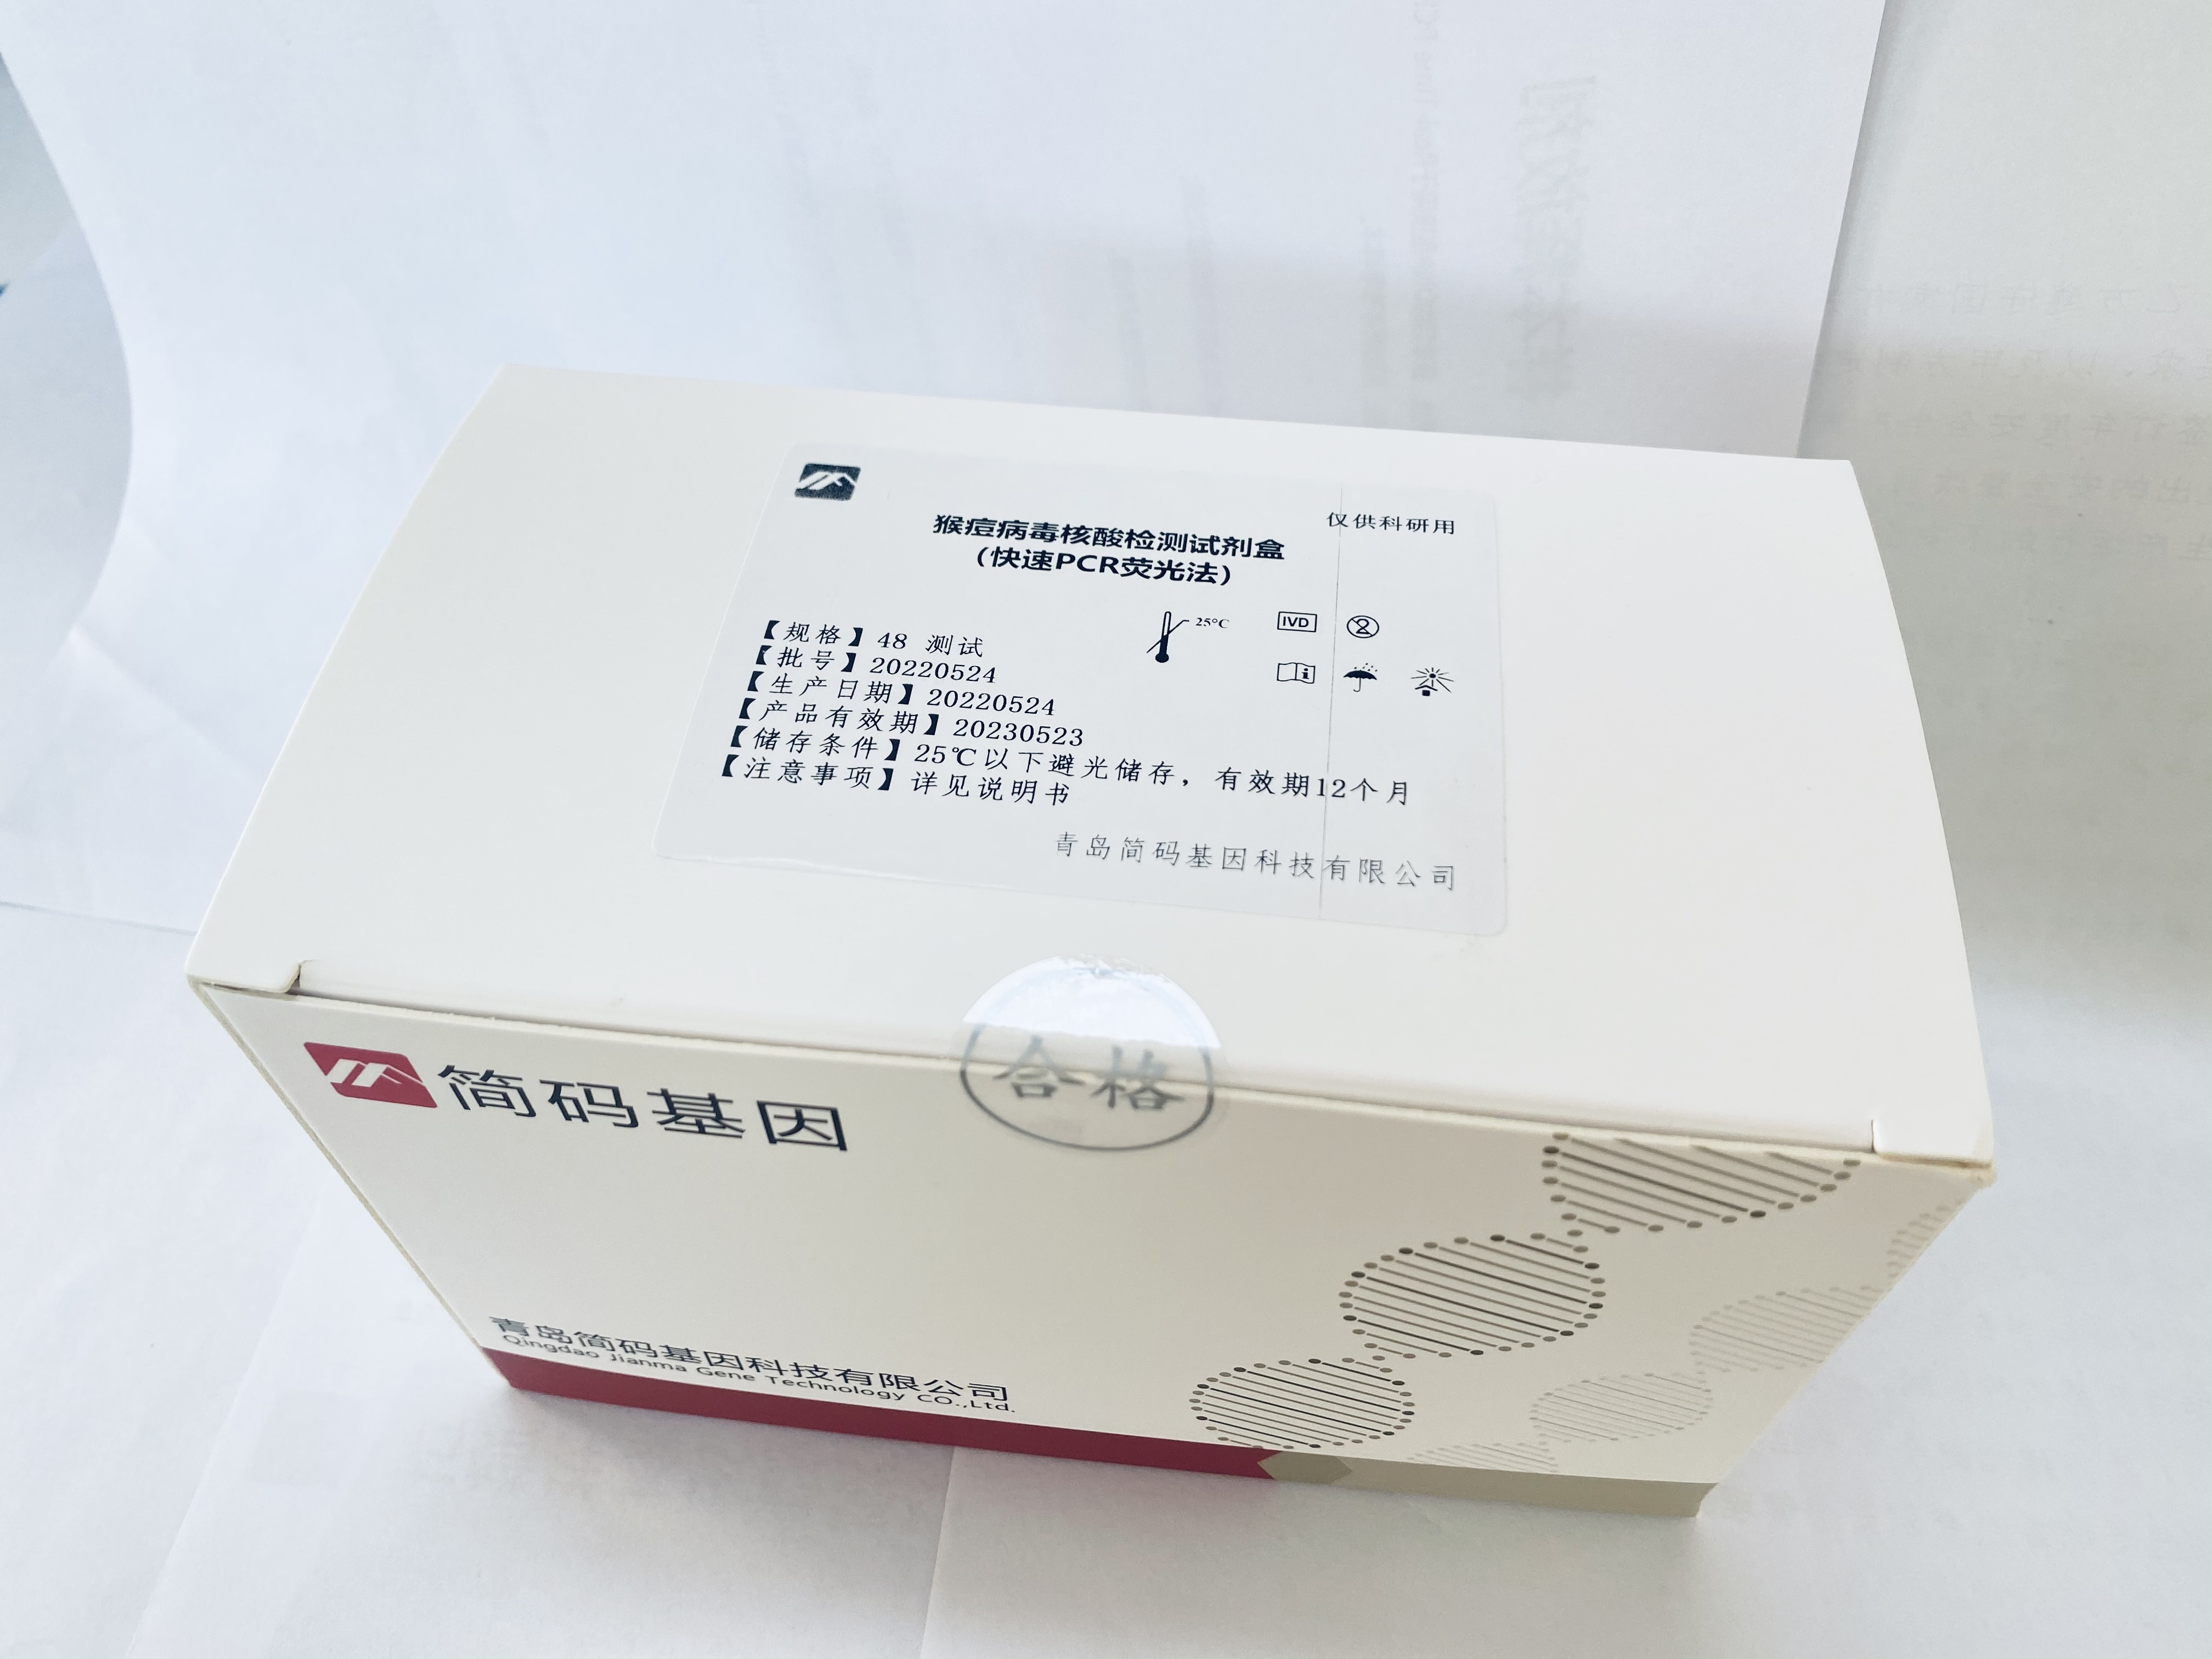 China monkey pox MPX Nucleic Acid Detection Kit manufacturers and suppliers | Jianma